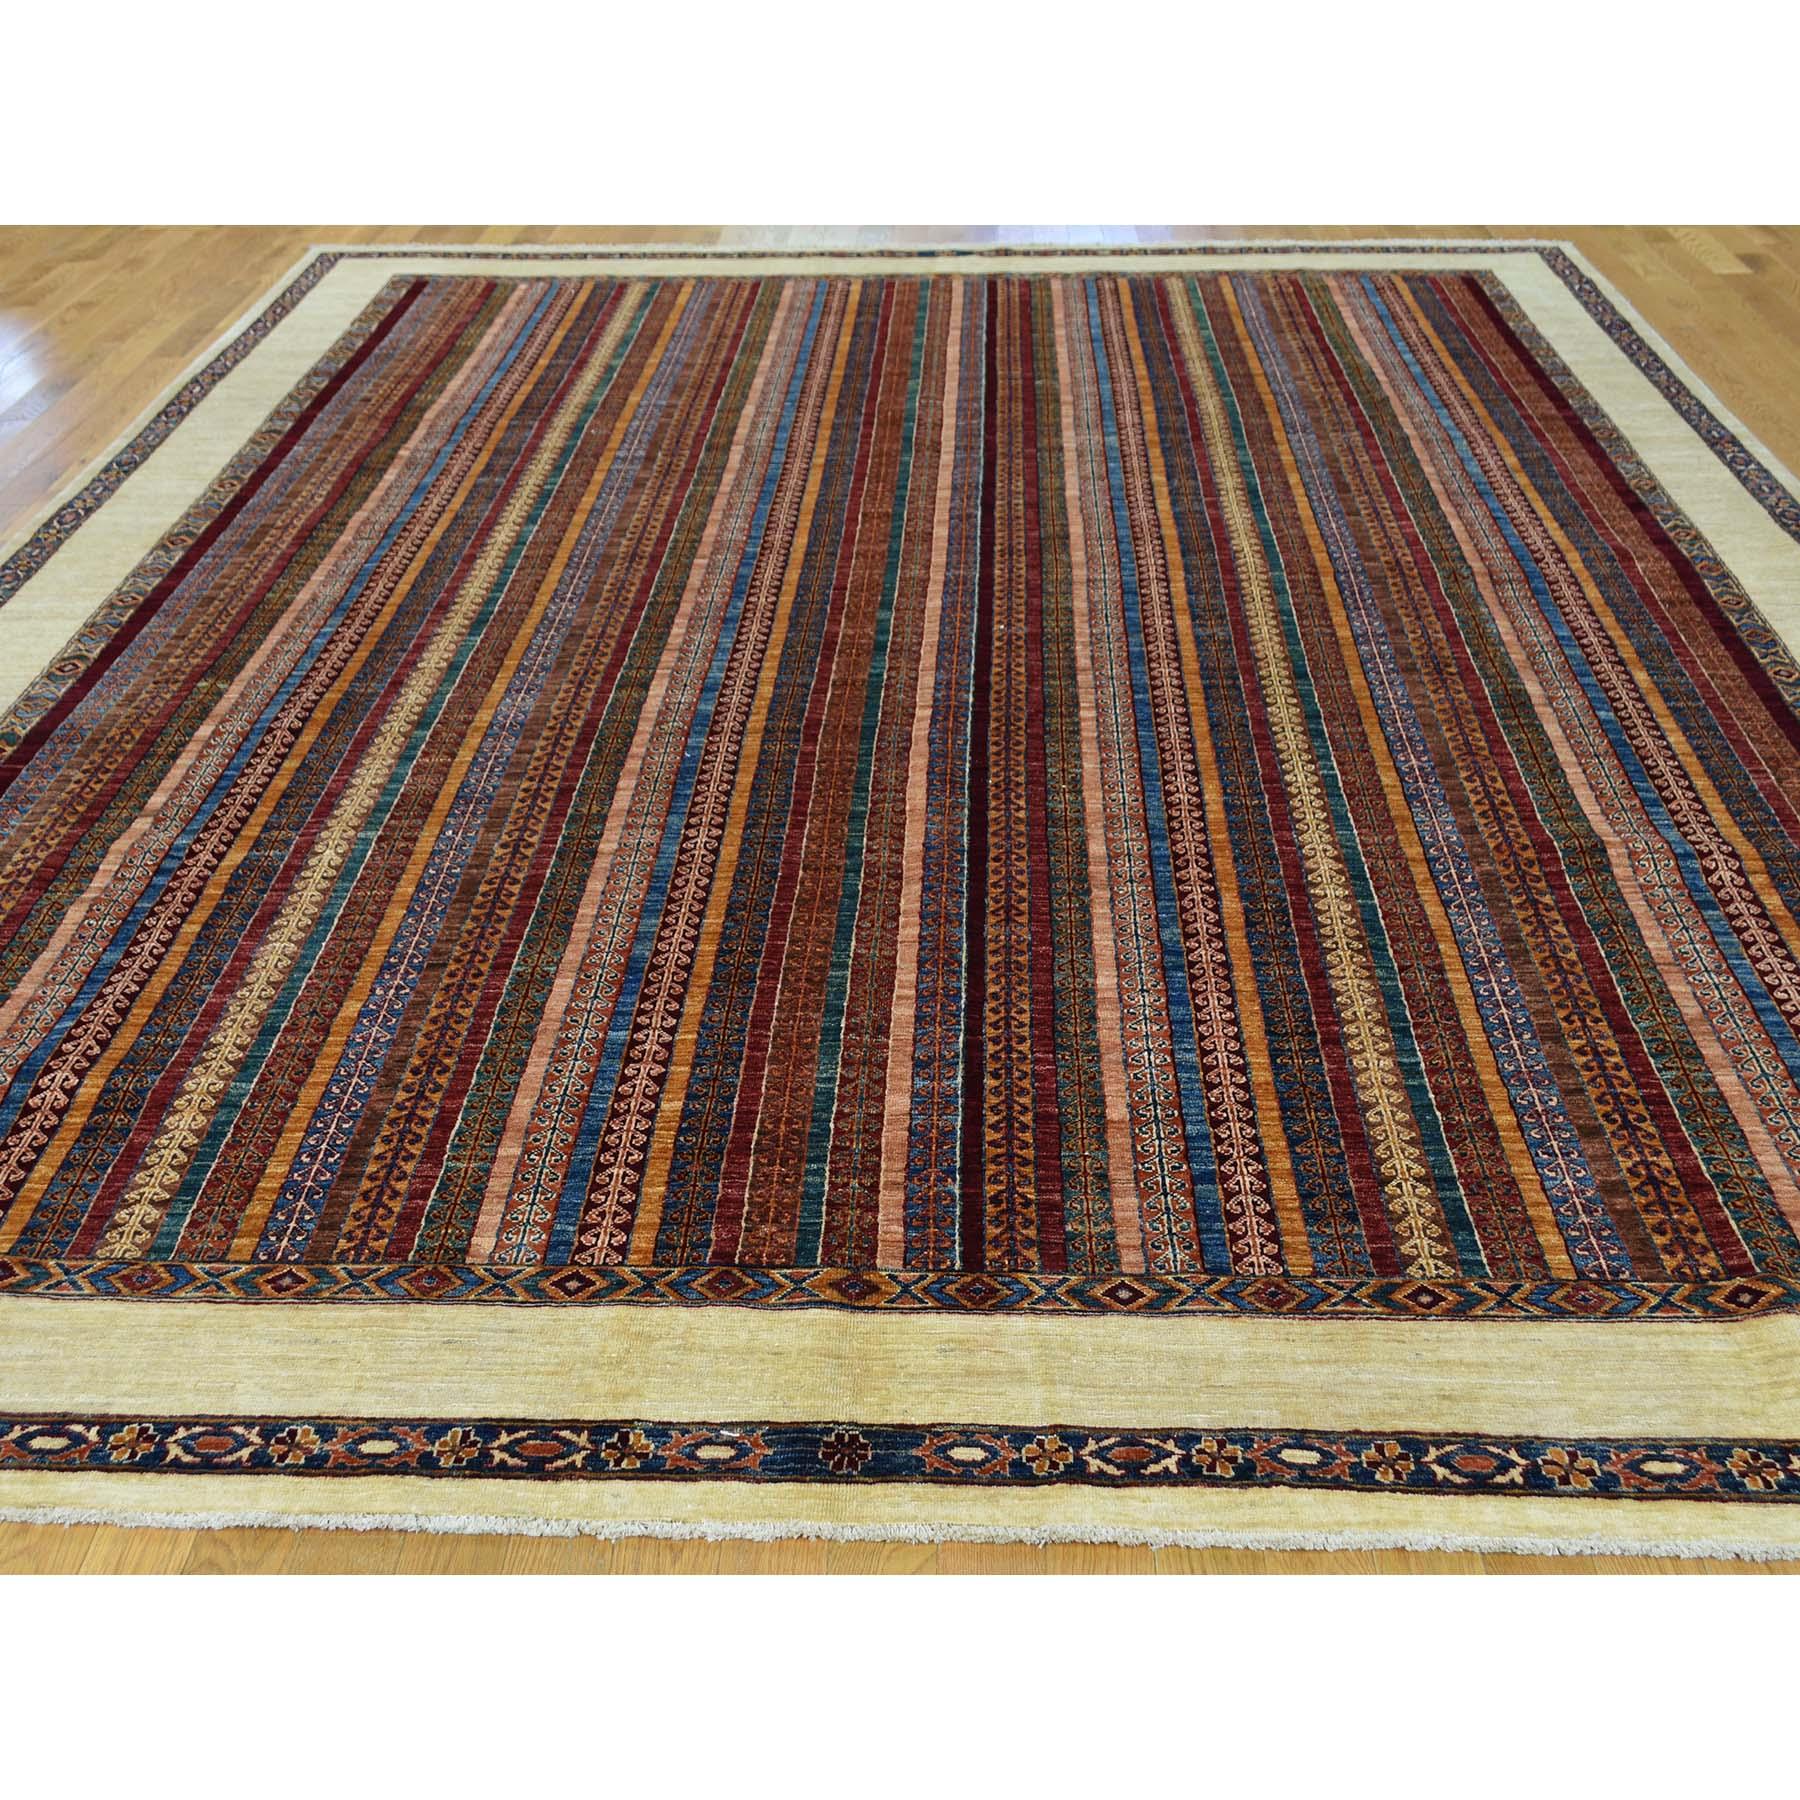 This is a truly genuine one-of-a-kind super Kazak shawl design hand knotted pure wool Oriental rug. It has been knotted for months and months in the centuries-old Persian weaving craftsmanship techniques by expert artisans. Measures: 9'10